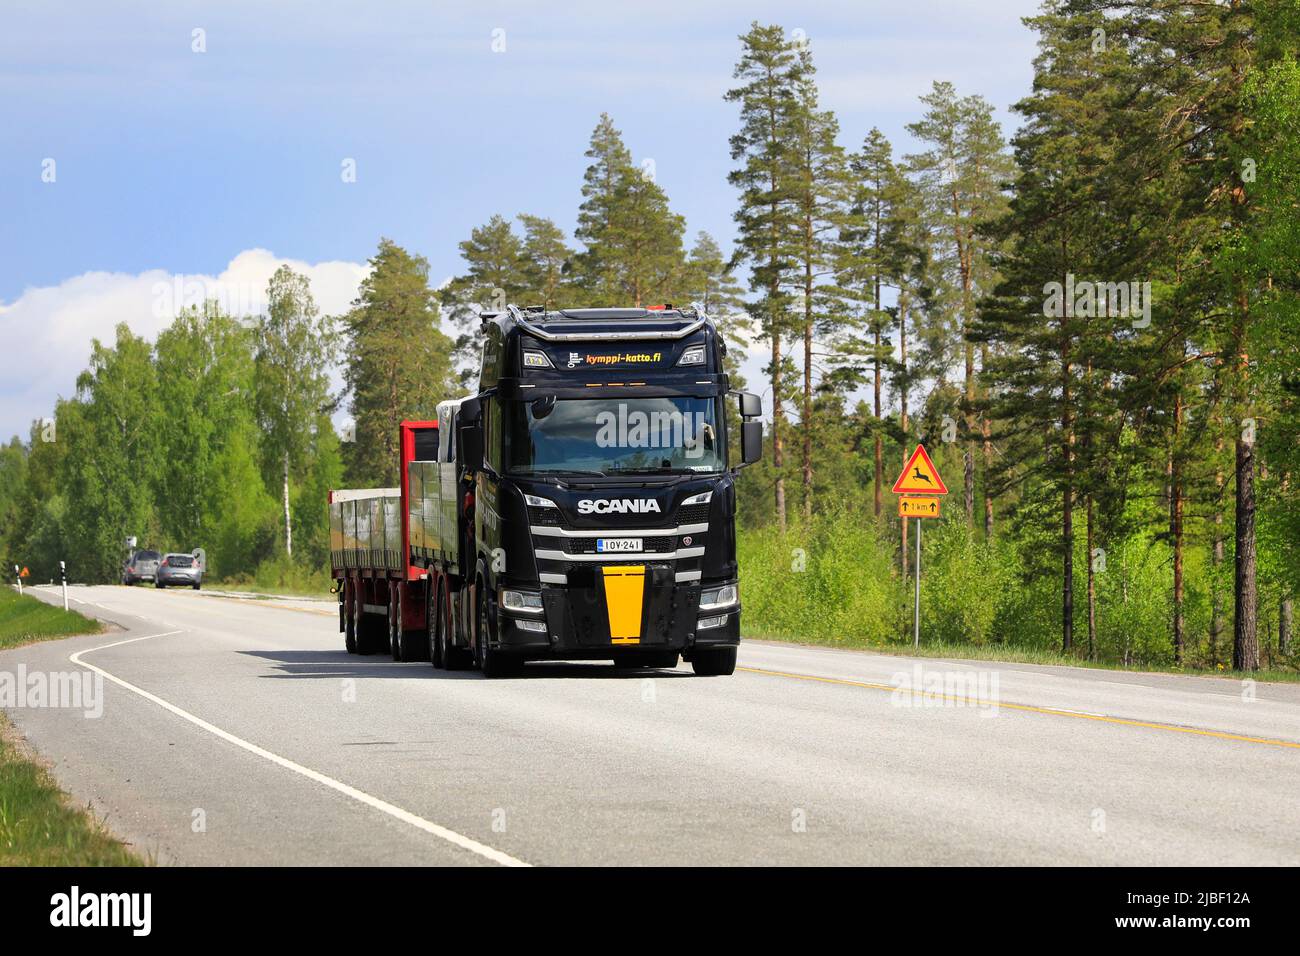 Black Scania truck and open trailer of Kymppi-Katto Oy transports load on road 25 on a sunny day. Raasepori, Finland. May 26, 2022. Stock Photo